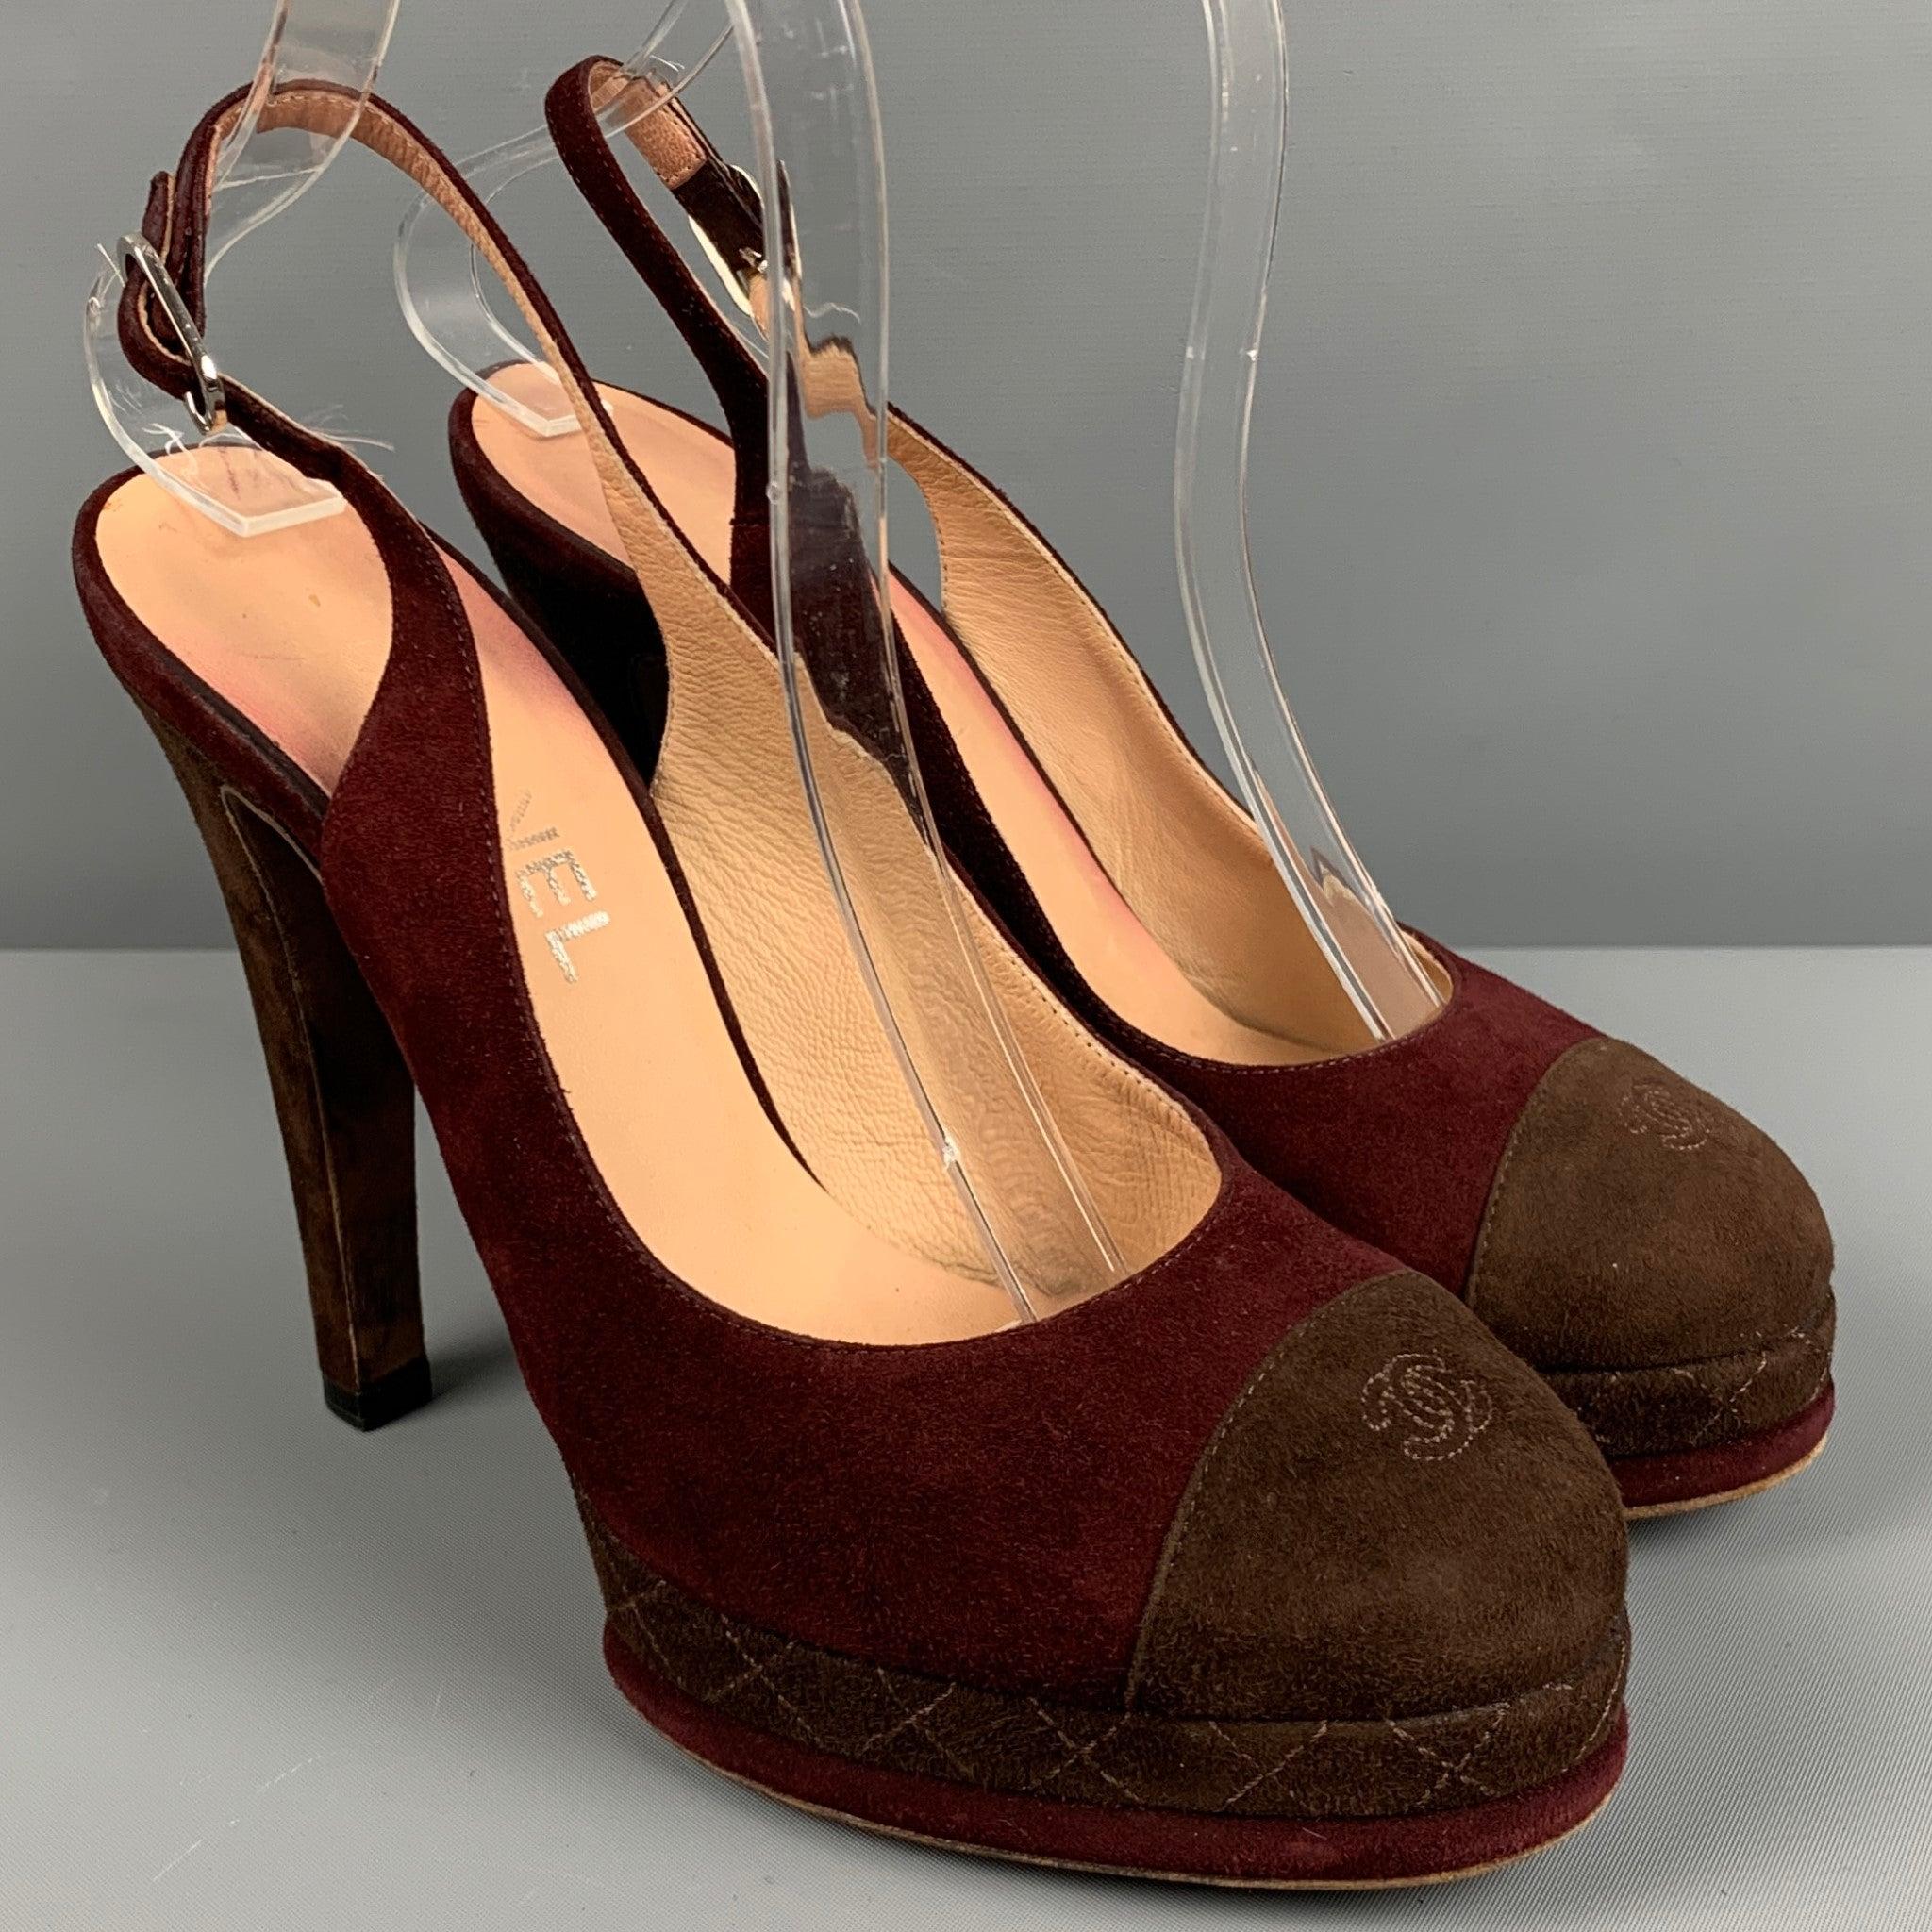 CHANEL pumps
in a
burgundy and brown suede fabric featuring cap toe with monogram and faux quilt toe detail, and a slingback style with platform. Made in Italy.Very Good Pre-Owned Condition. Minor signs of wear. 

Marked:   38.5 

Measurements: 
 